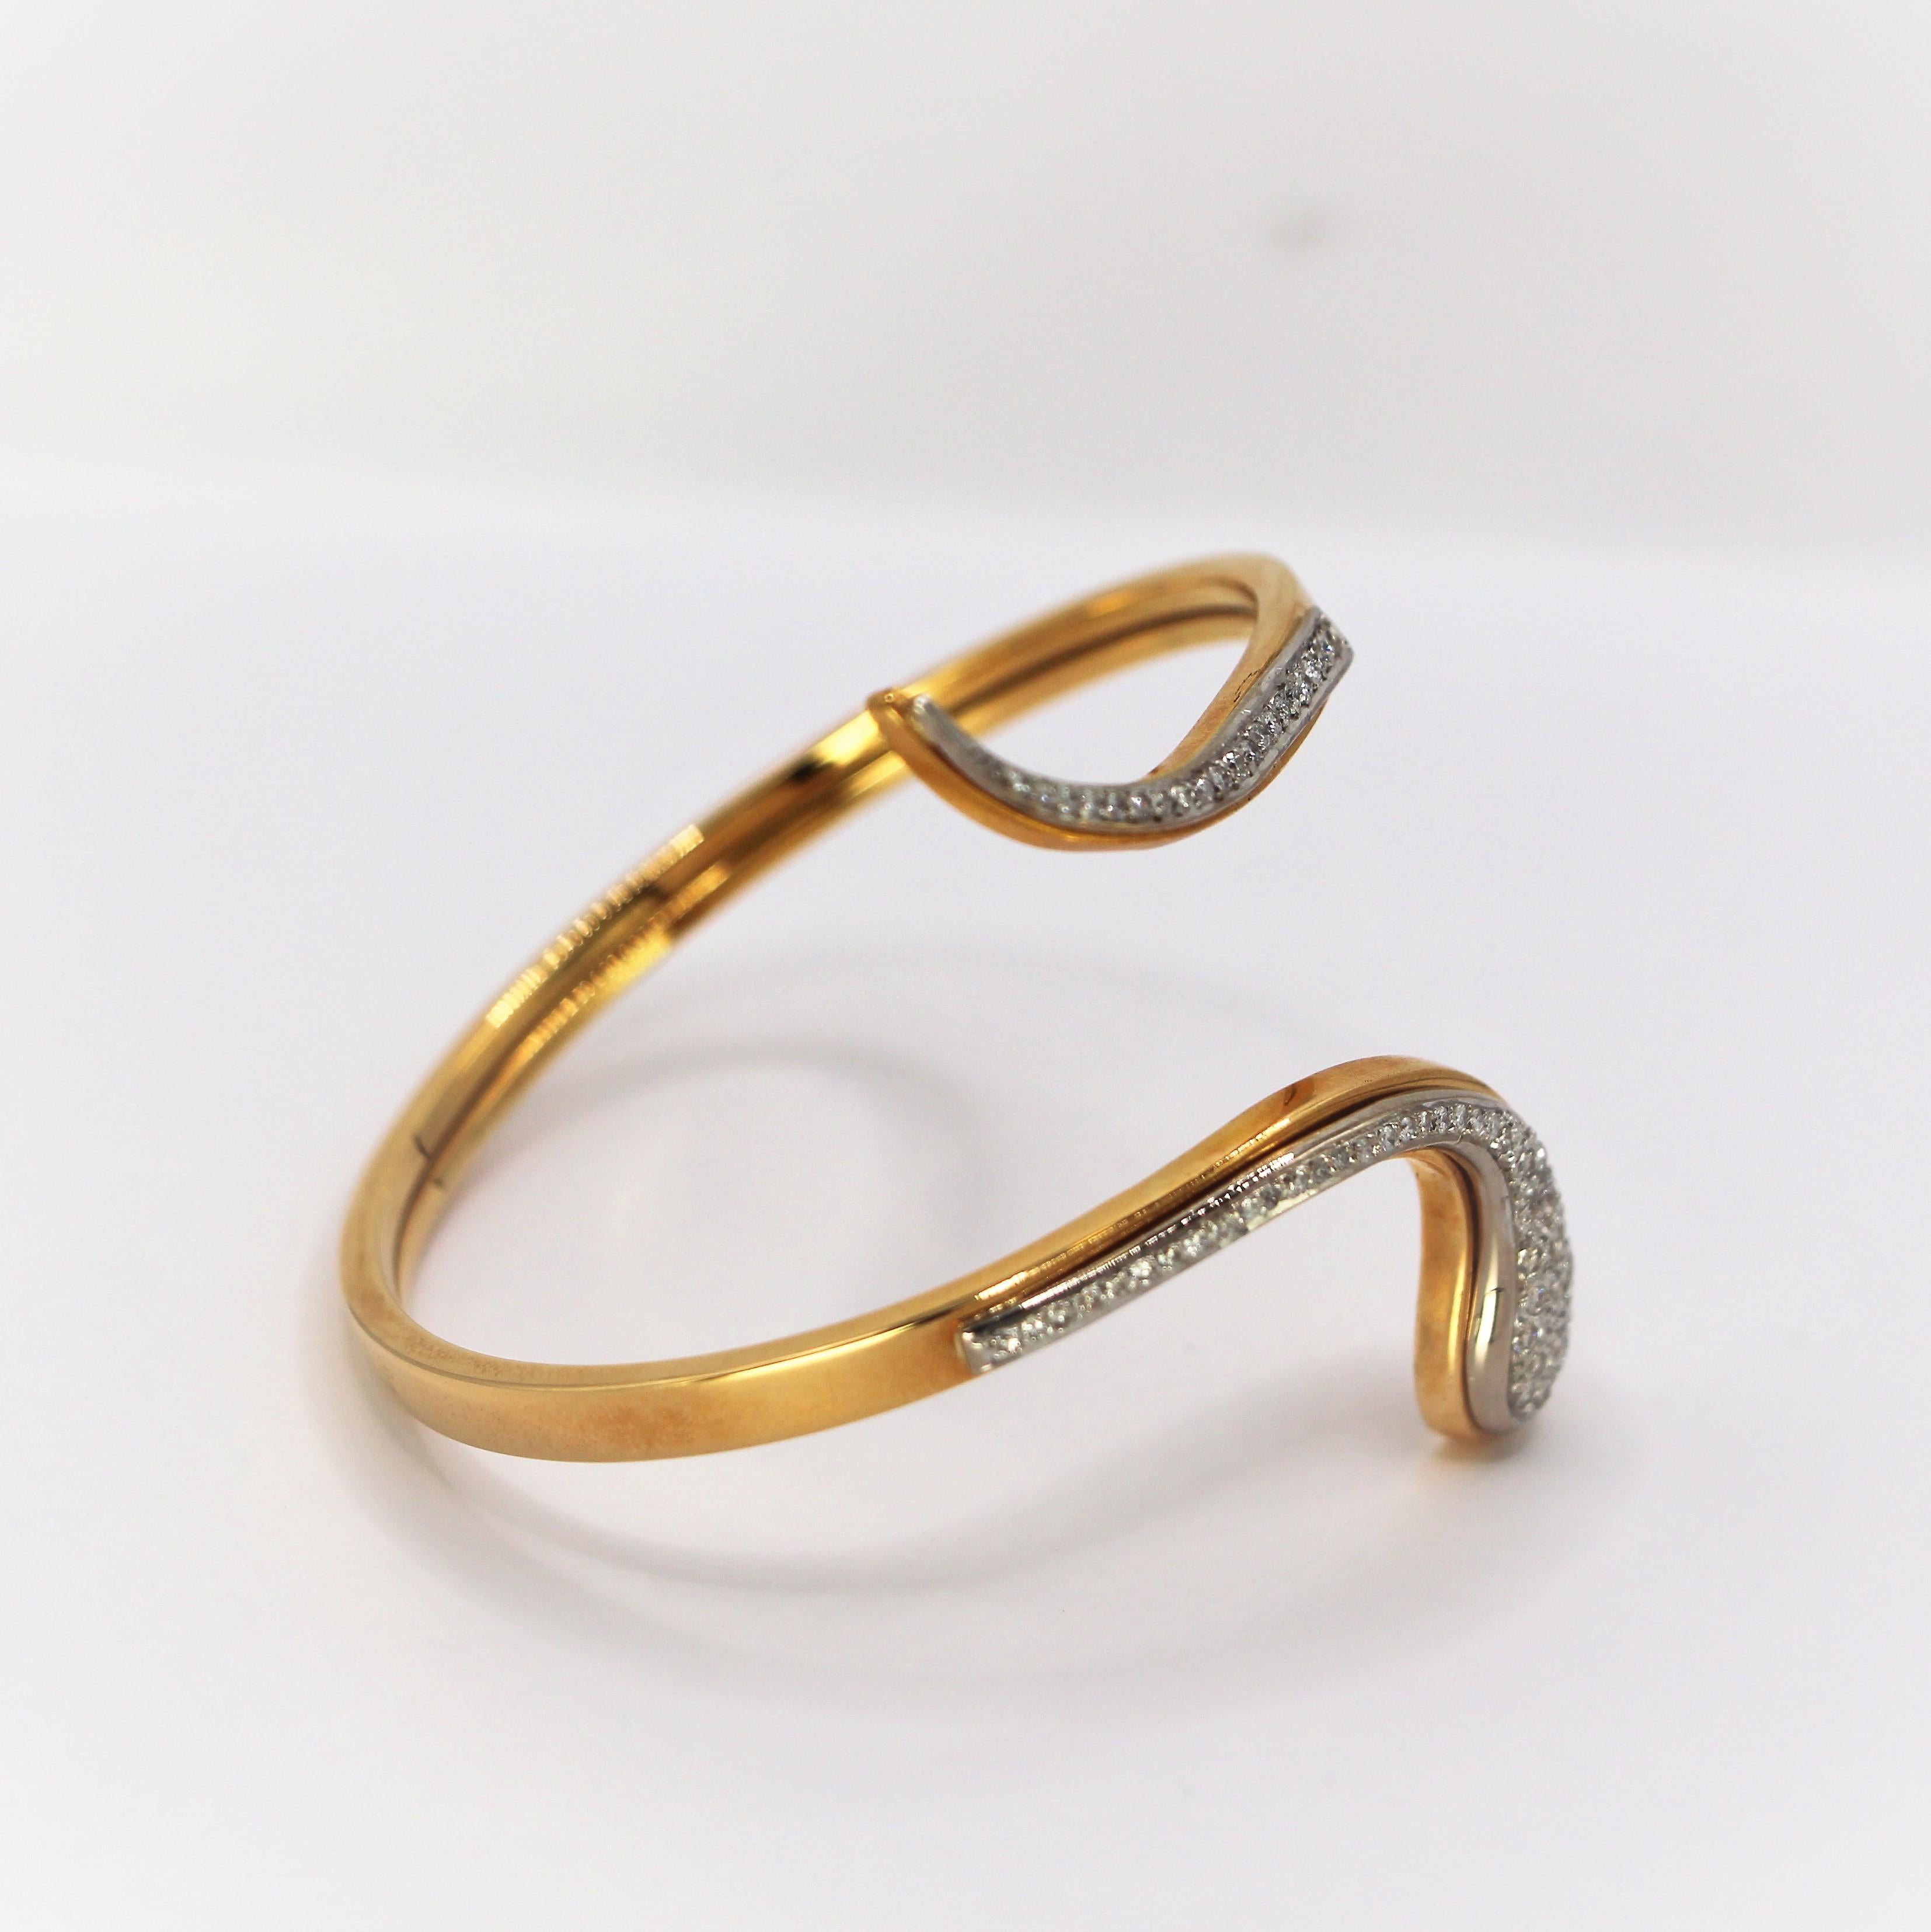 Open Bangle Snake Bracelet in 18Kt Yellow and White Gold  Diamonds Pave Setting, An open style bangle with the sneak and the diamonds in pave setting surrounded by white gold they give a reflection of glam around your hand, in a very stylish